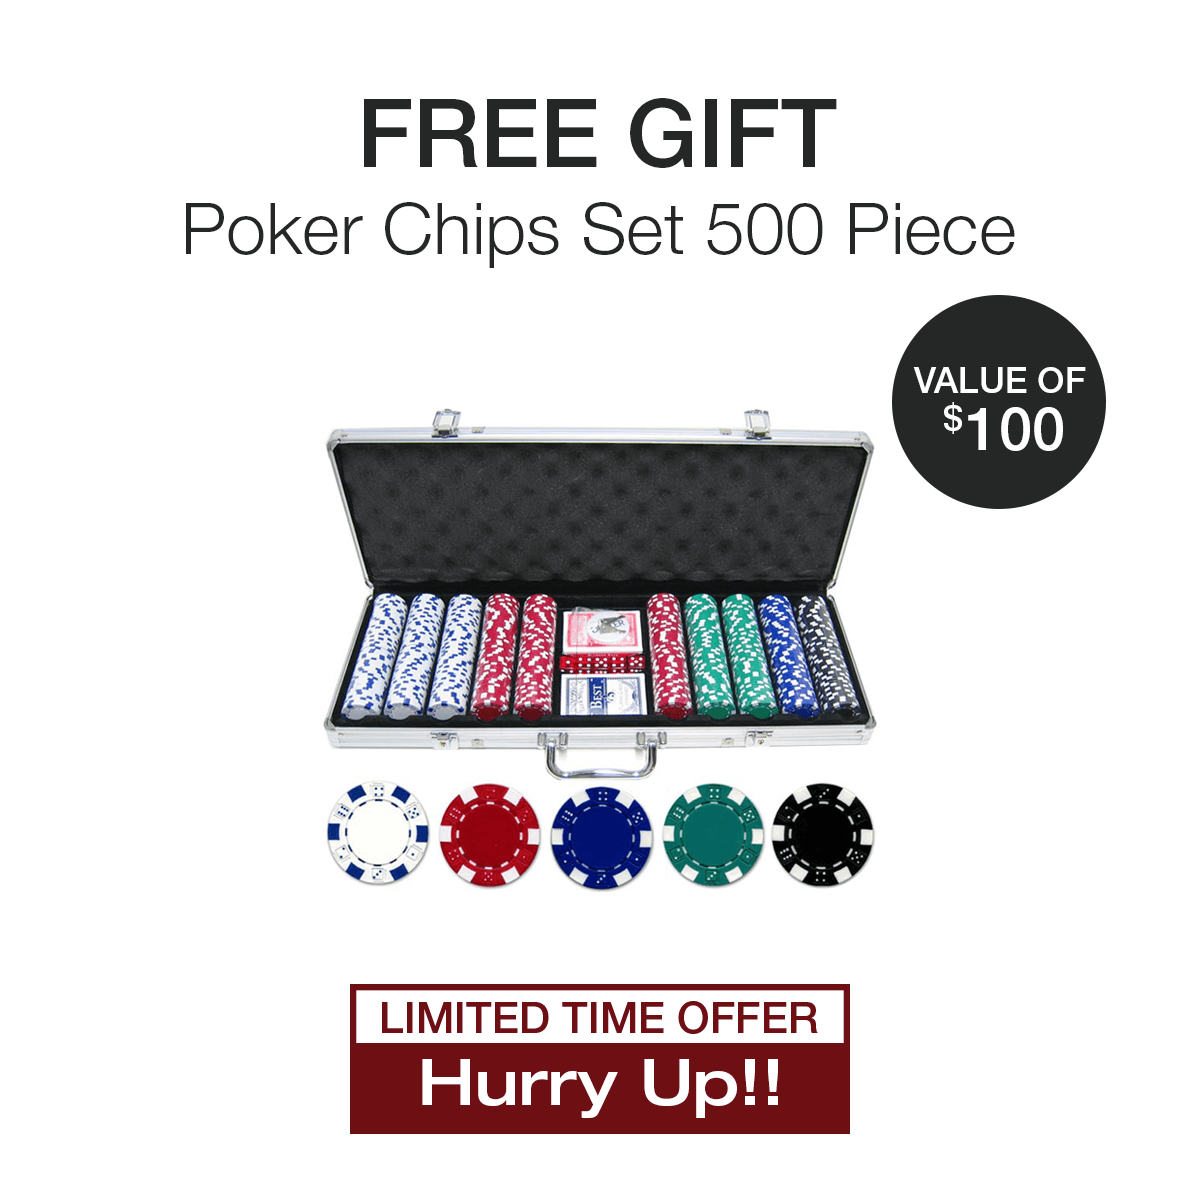 BBO Poker Tables Aces Pro Folding Poker Table 10 Person and Dealer - Gaming Blaze